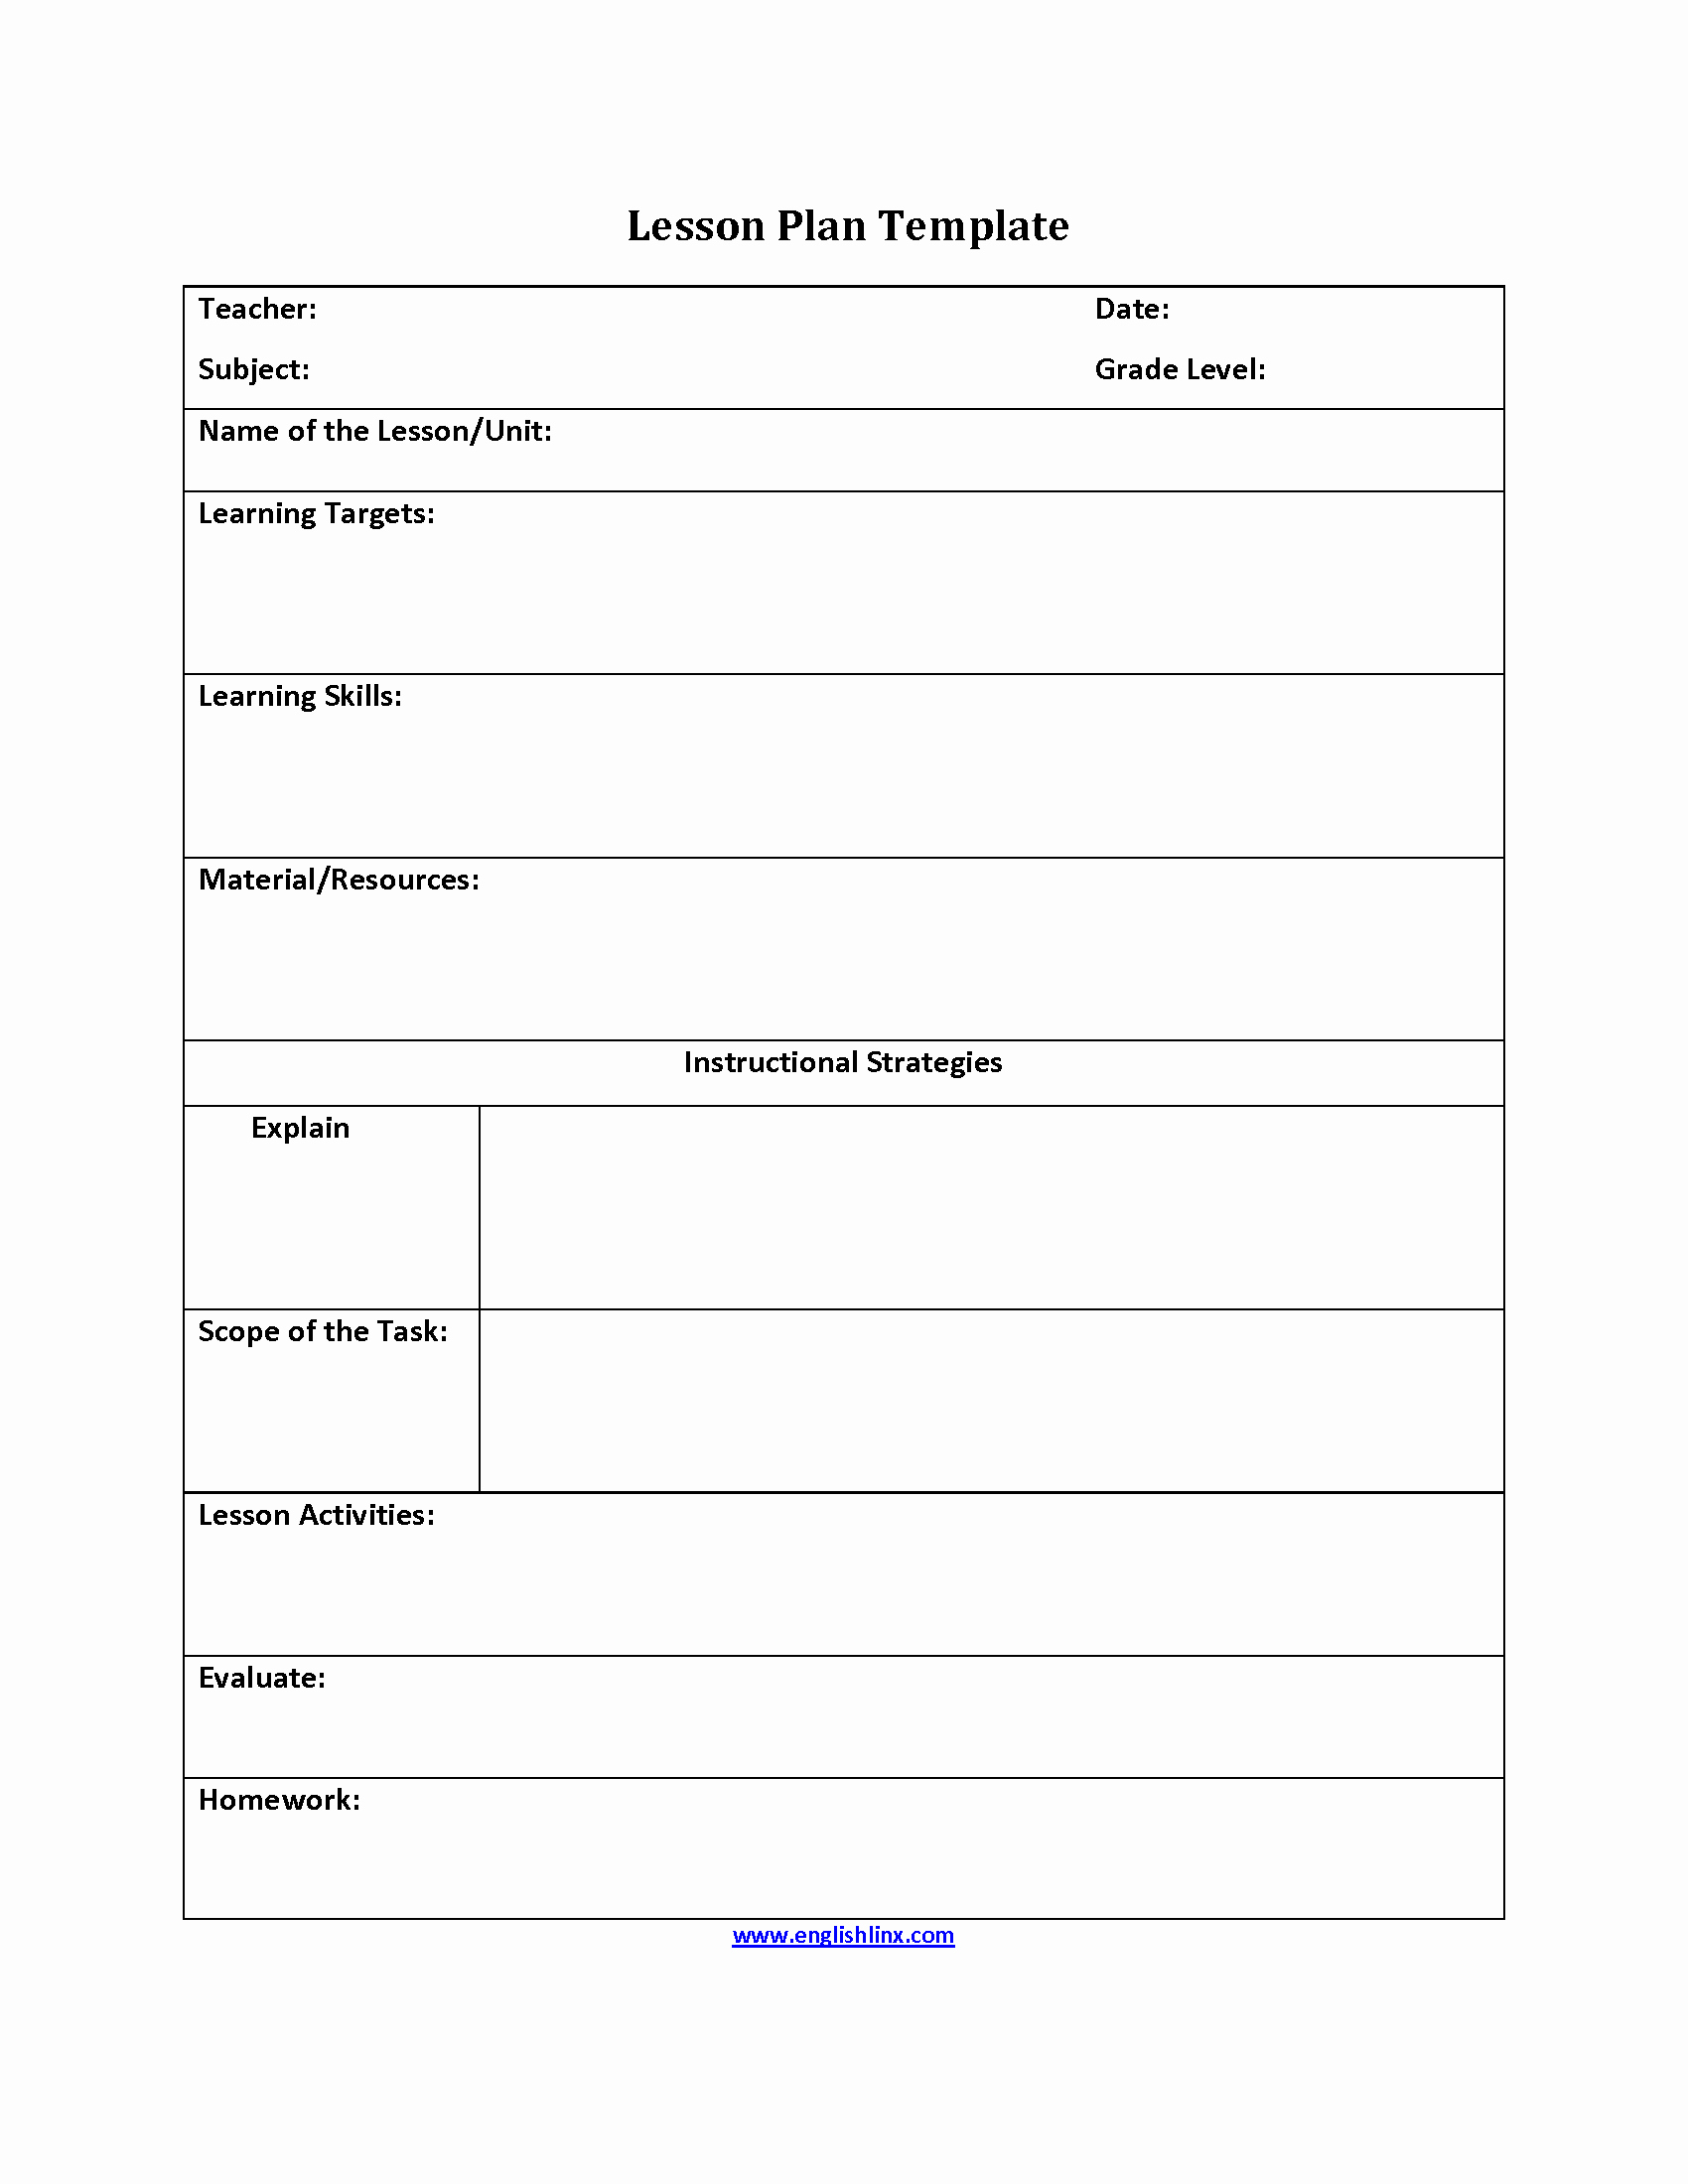 Weekly Lesson Plan Template Elementary Unique What is Lesson Plan Template